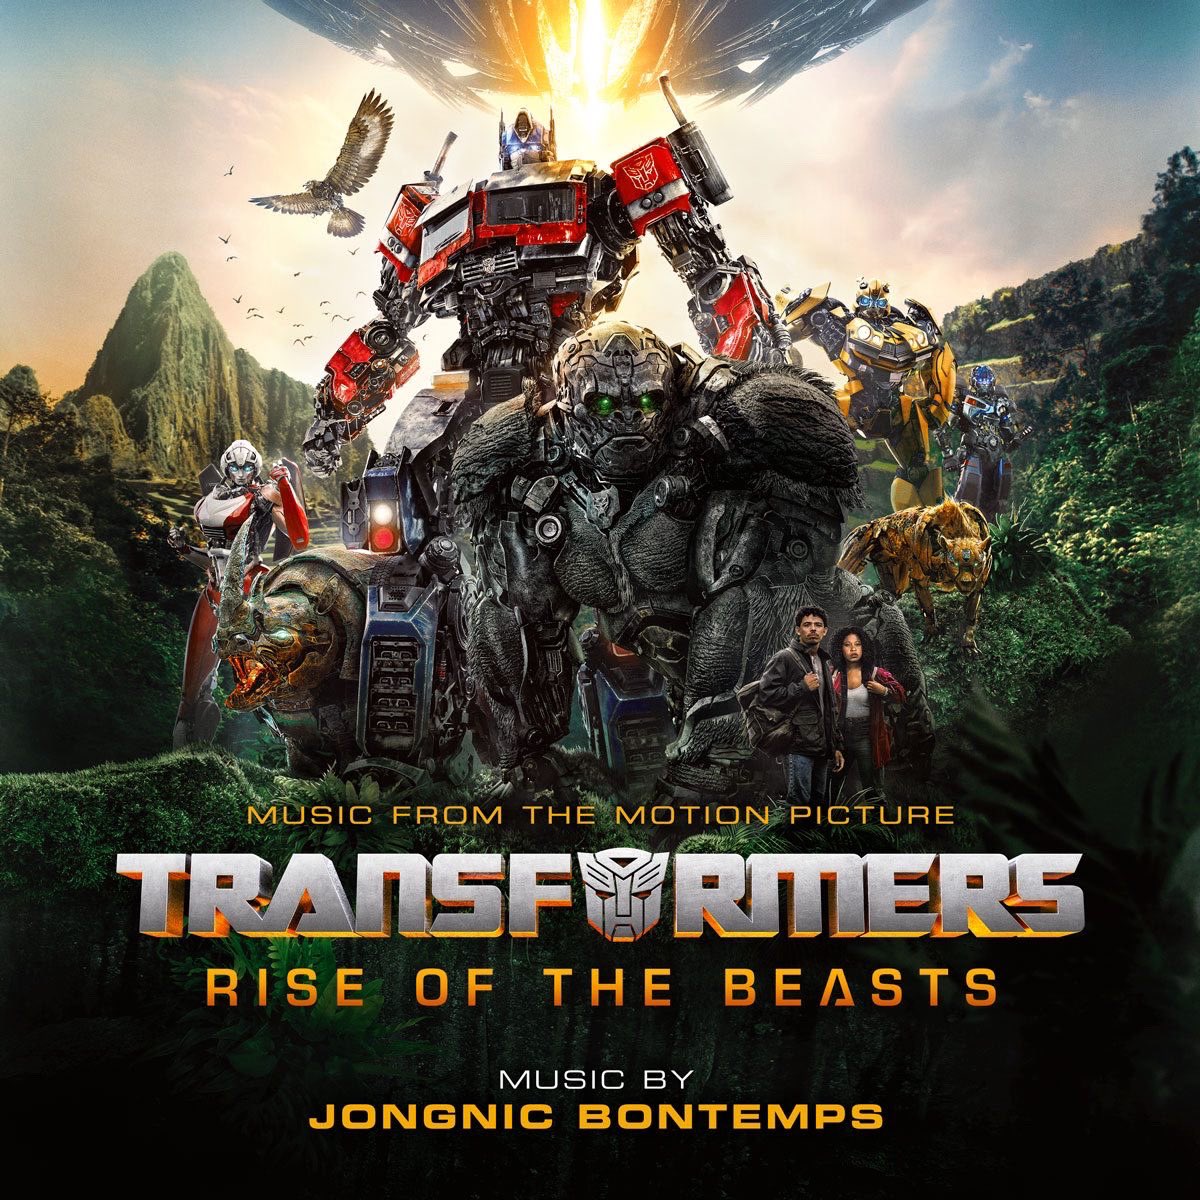 BREAKING: The first track of the #Transformers: #RiseOfTheBeasts original score album, “The Maximals” releasing tomorrow June 2nd! Album cover revealed! When I tell y’all it’s AWESOME, it’s AWESOME. Just like the rest of the score! My album review dropping tonight. 🔥🎥🤖🚚🦍🌳🎶